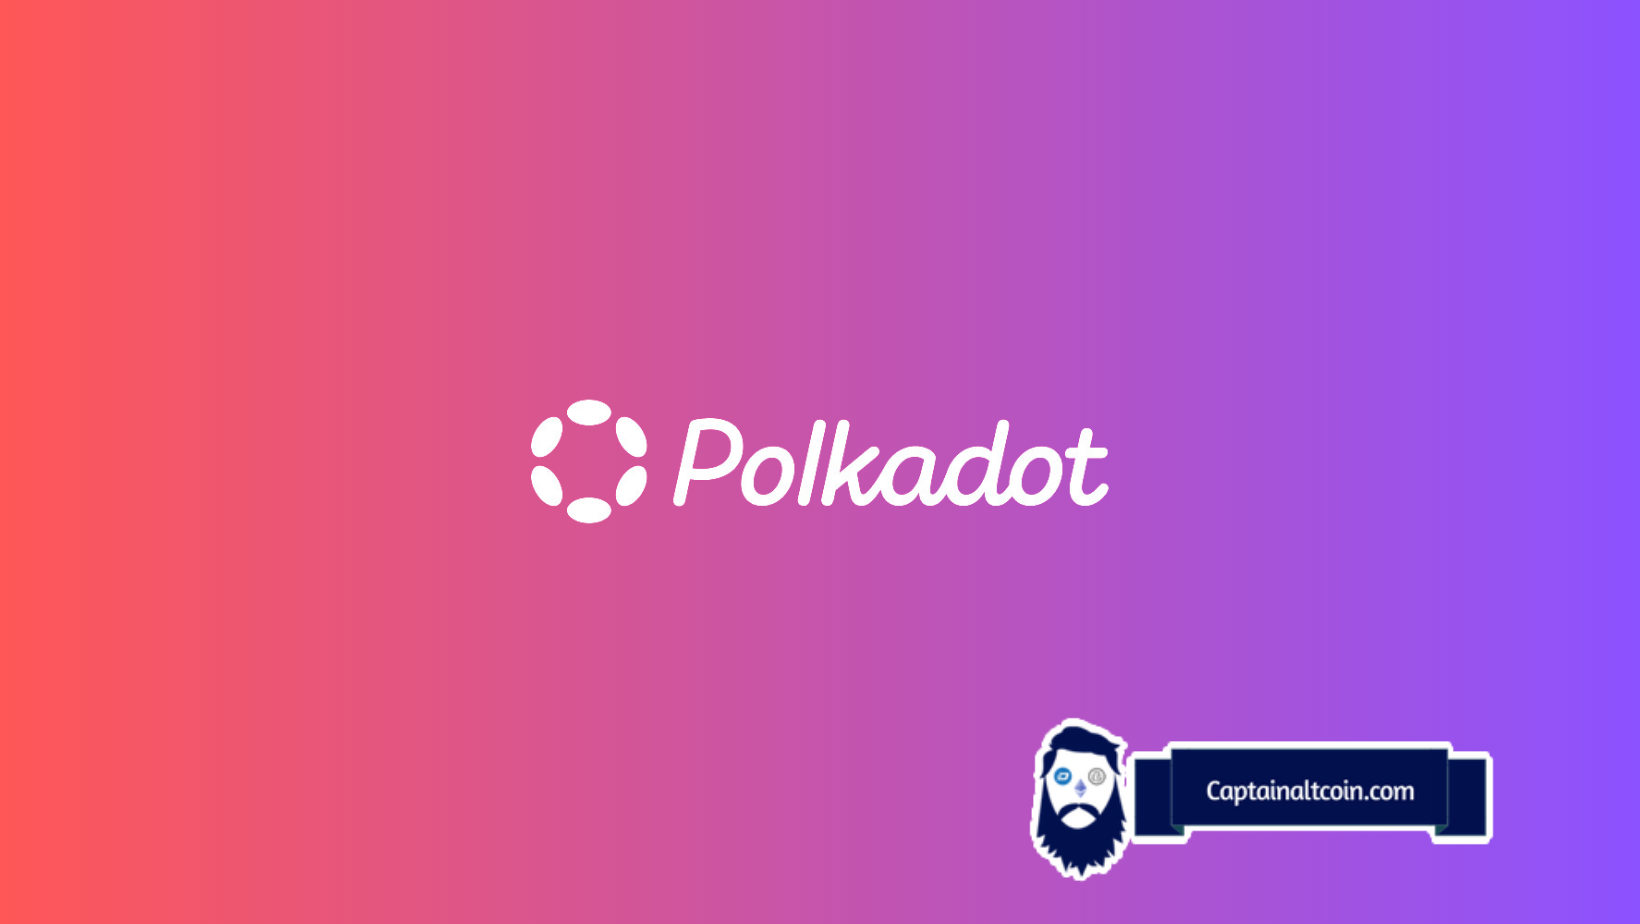 Polkadot In The Process Of Retesting New Support, Analyst Anticipates a 30% Rally If DOT Retests This Level